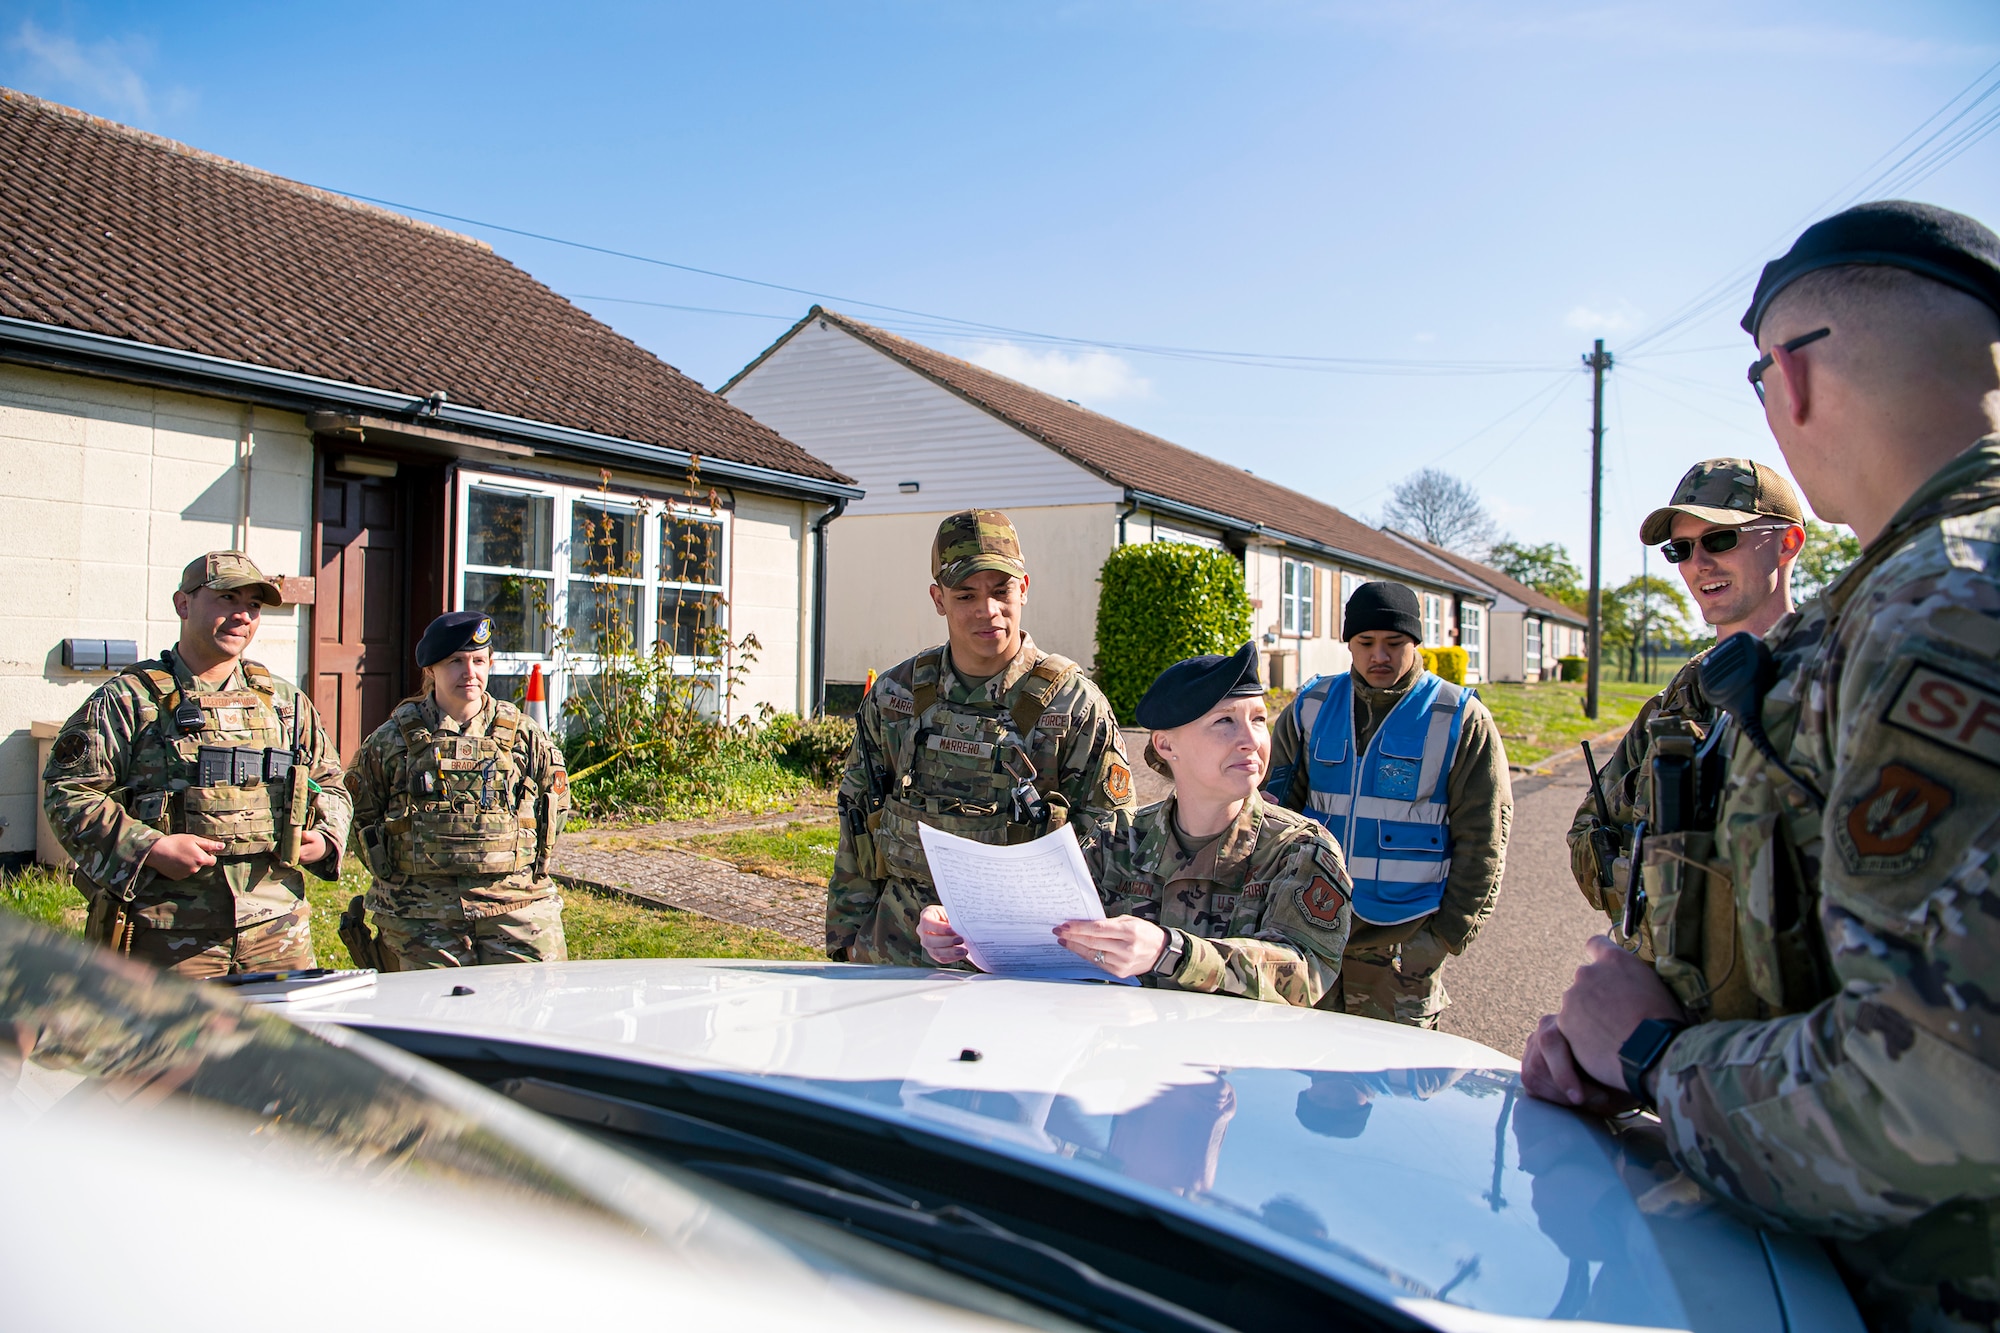 U.S. Air Force Master Sgt. Melissa Jackson, 423d Security Forces Squadron section chief of training, speaks with Airmen from the 423d SFS following a simulated domestic disturbance at RAF Alconbury, England, April 26, 2022. The exercise was designed to evaluate the strengths and weaknesses of 423d SFS members' response to various scenarios including domestic disturbances, drunk driving and other base security incidents. (U.S. Air Force photo by Staff Sgt. Eugene Oliver)